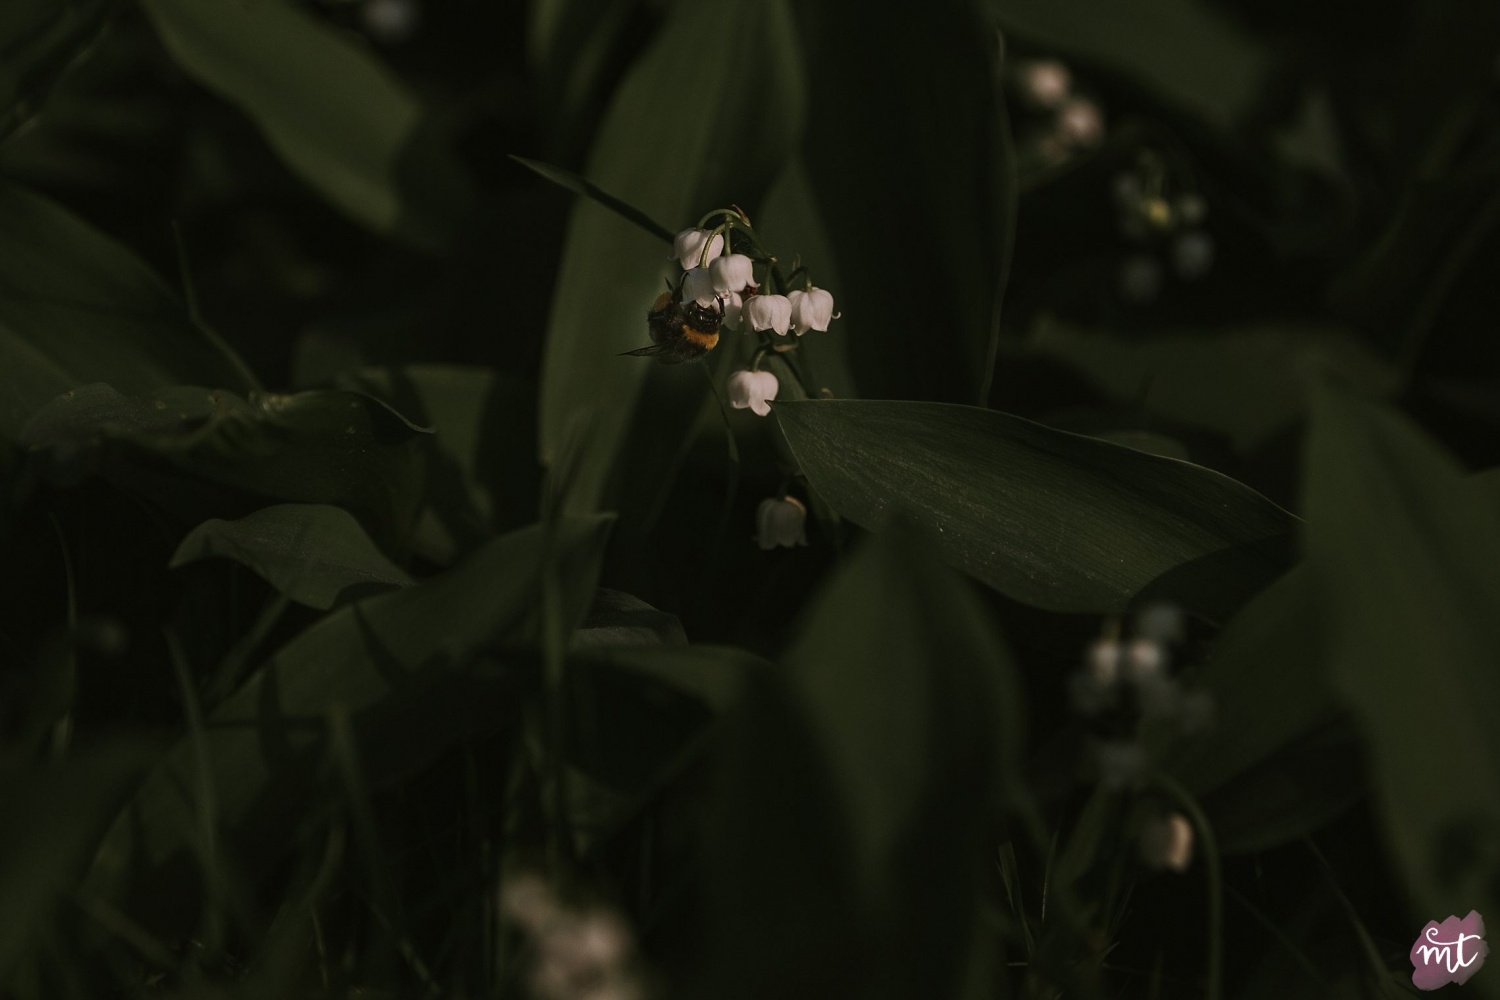 Seasons, Summer, Natural Light, UK Photographer, Real Life, Mother Nature, Lily of the Valley